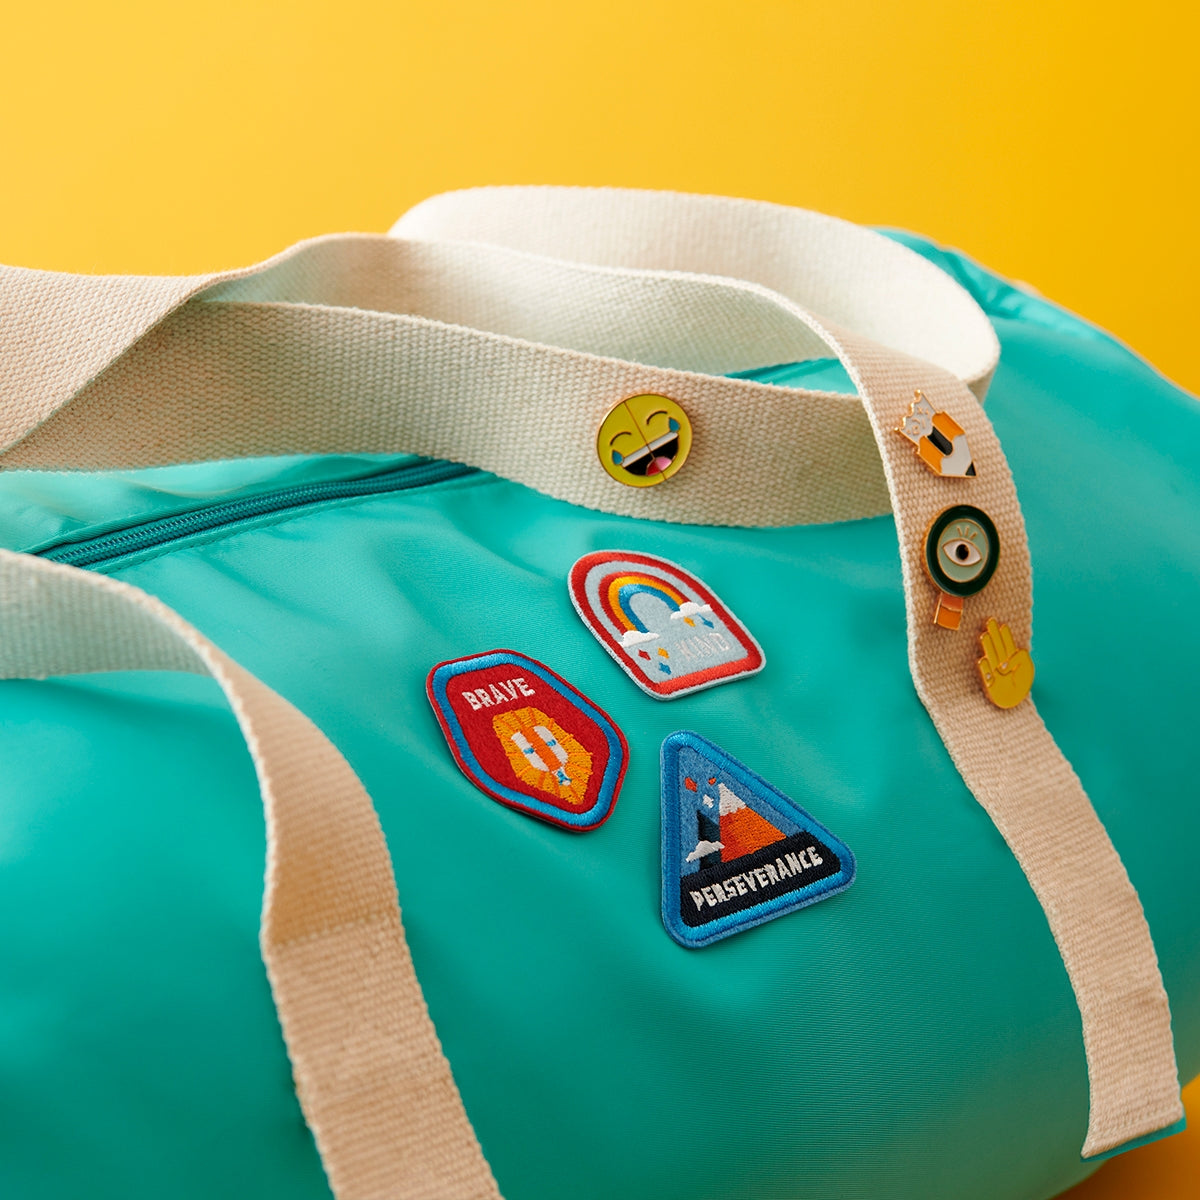 Set of 4 Character Badge Patches designed for children, featuring the words 'Creative, Funny, Team Player, Optimist' with vibrant colors, adhesive and iron-on backing, displayed on a aqua blue duffle bag.